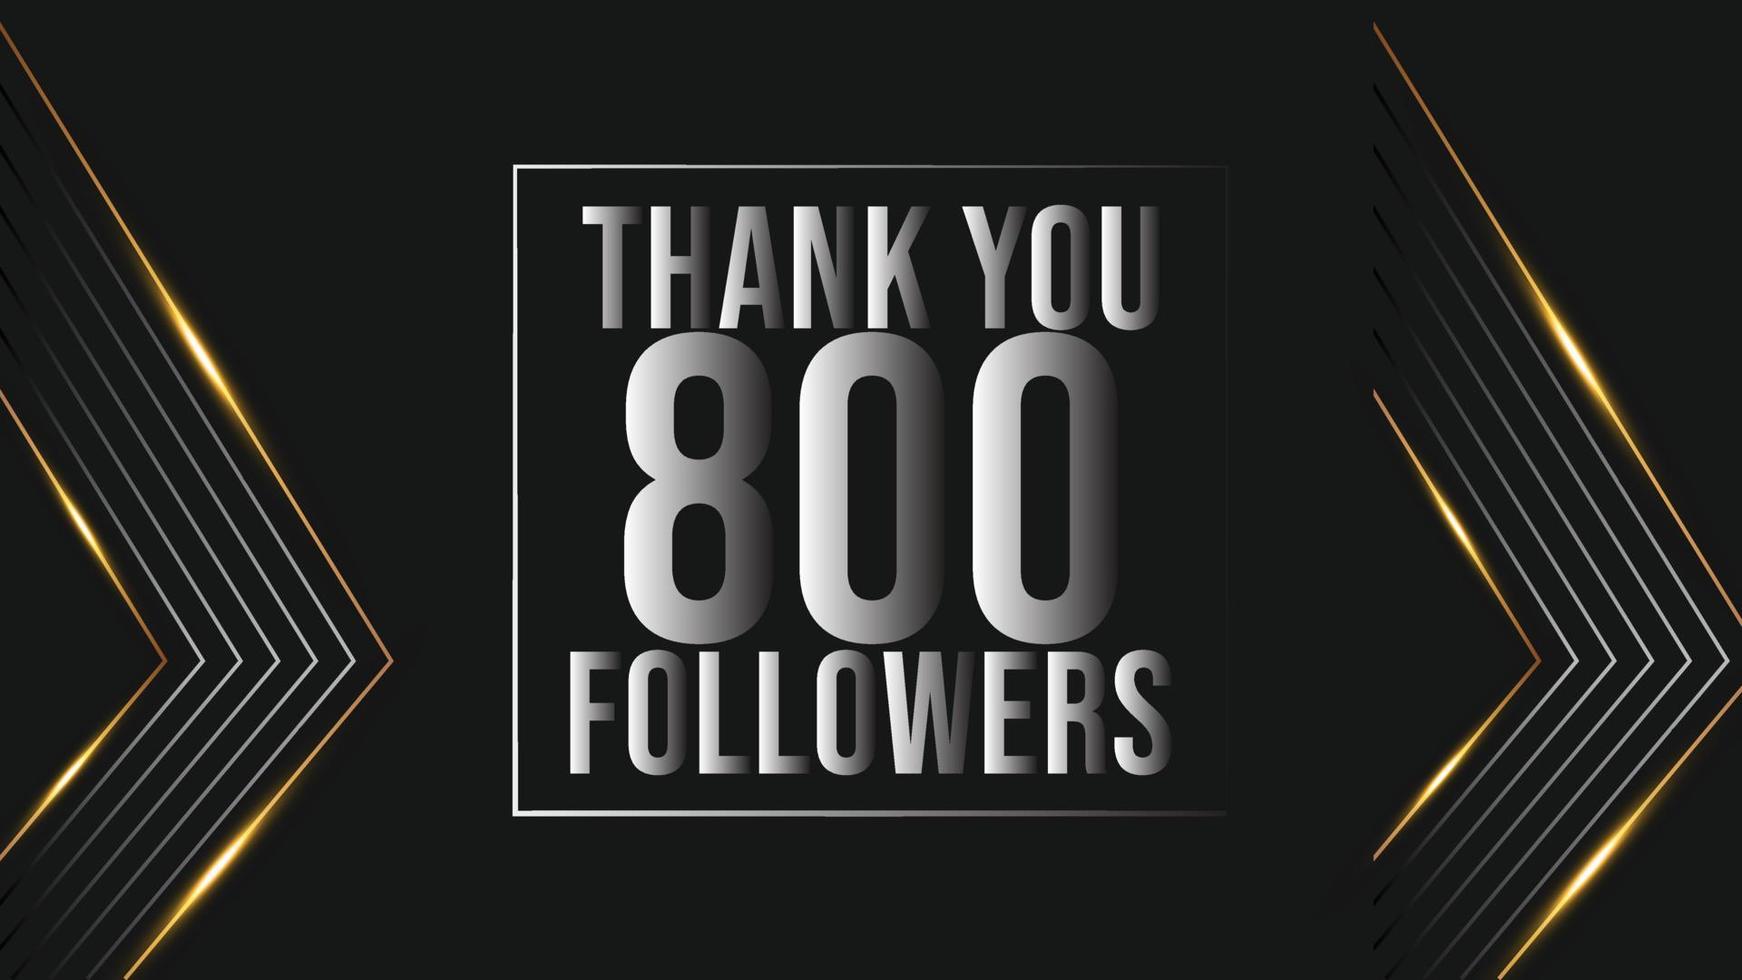 Thank you 800 followers congratulation template banner. eight hundred followers celebration 800 subscribers template for social media vector